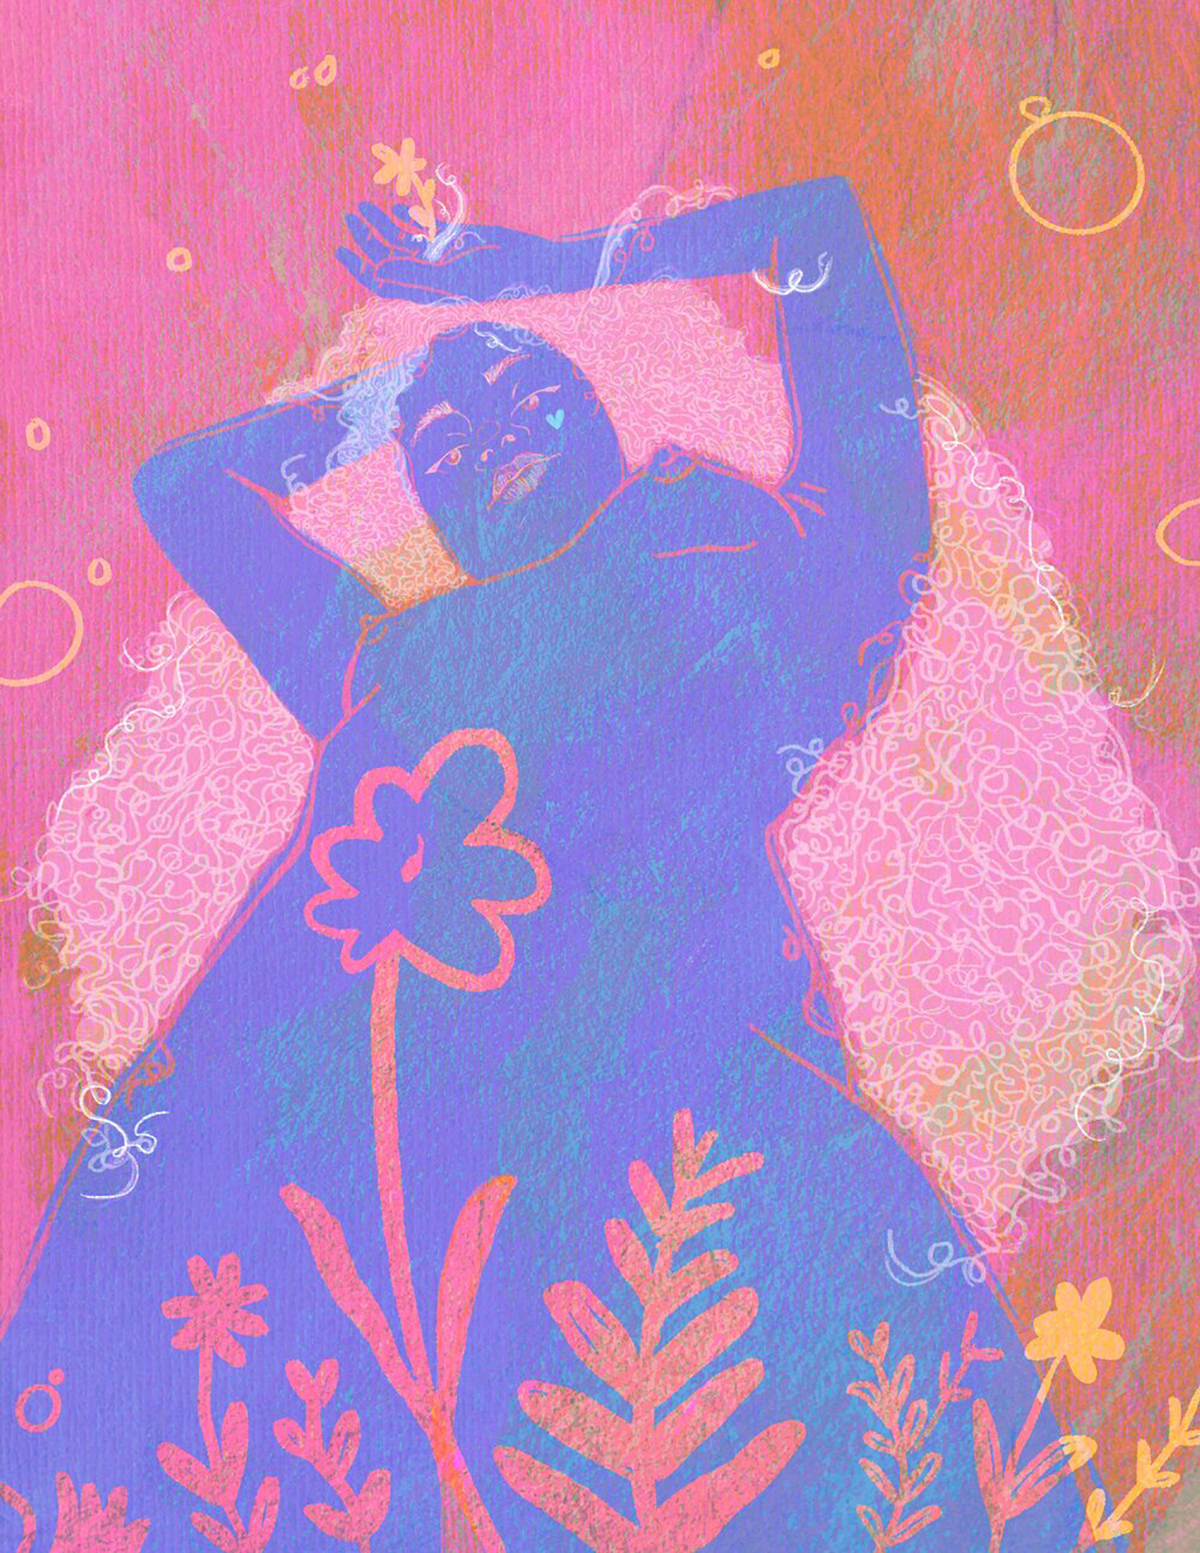 Bright digital illustration of a naked black/latinx woman laying back in field, blue body, flowers overlaying her body, arms relaxed over her head of full, curly hair